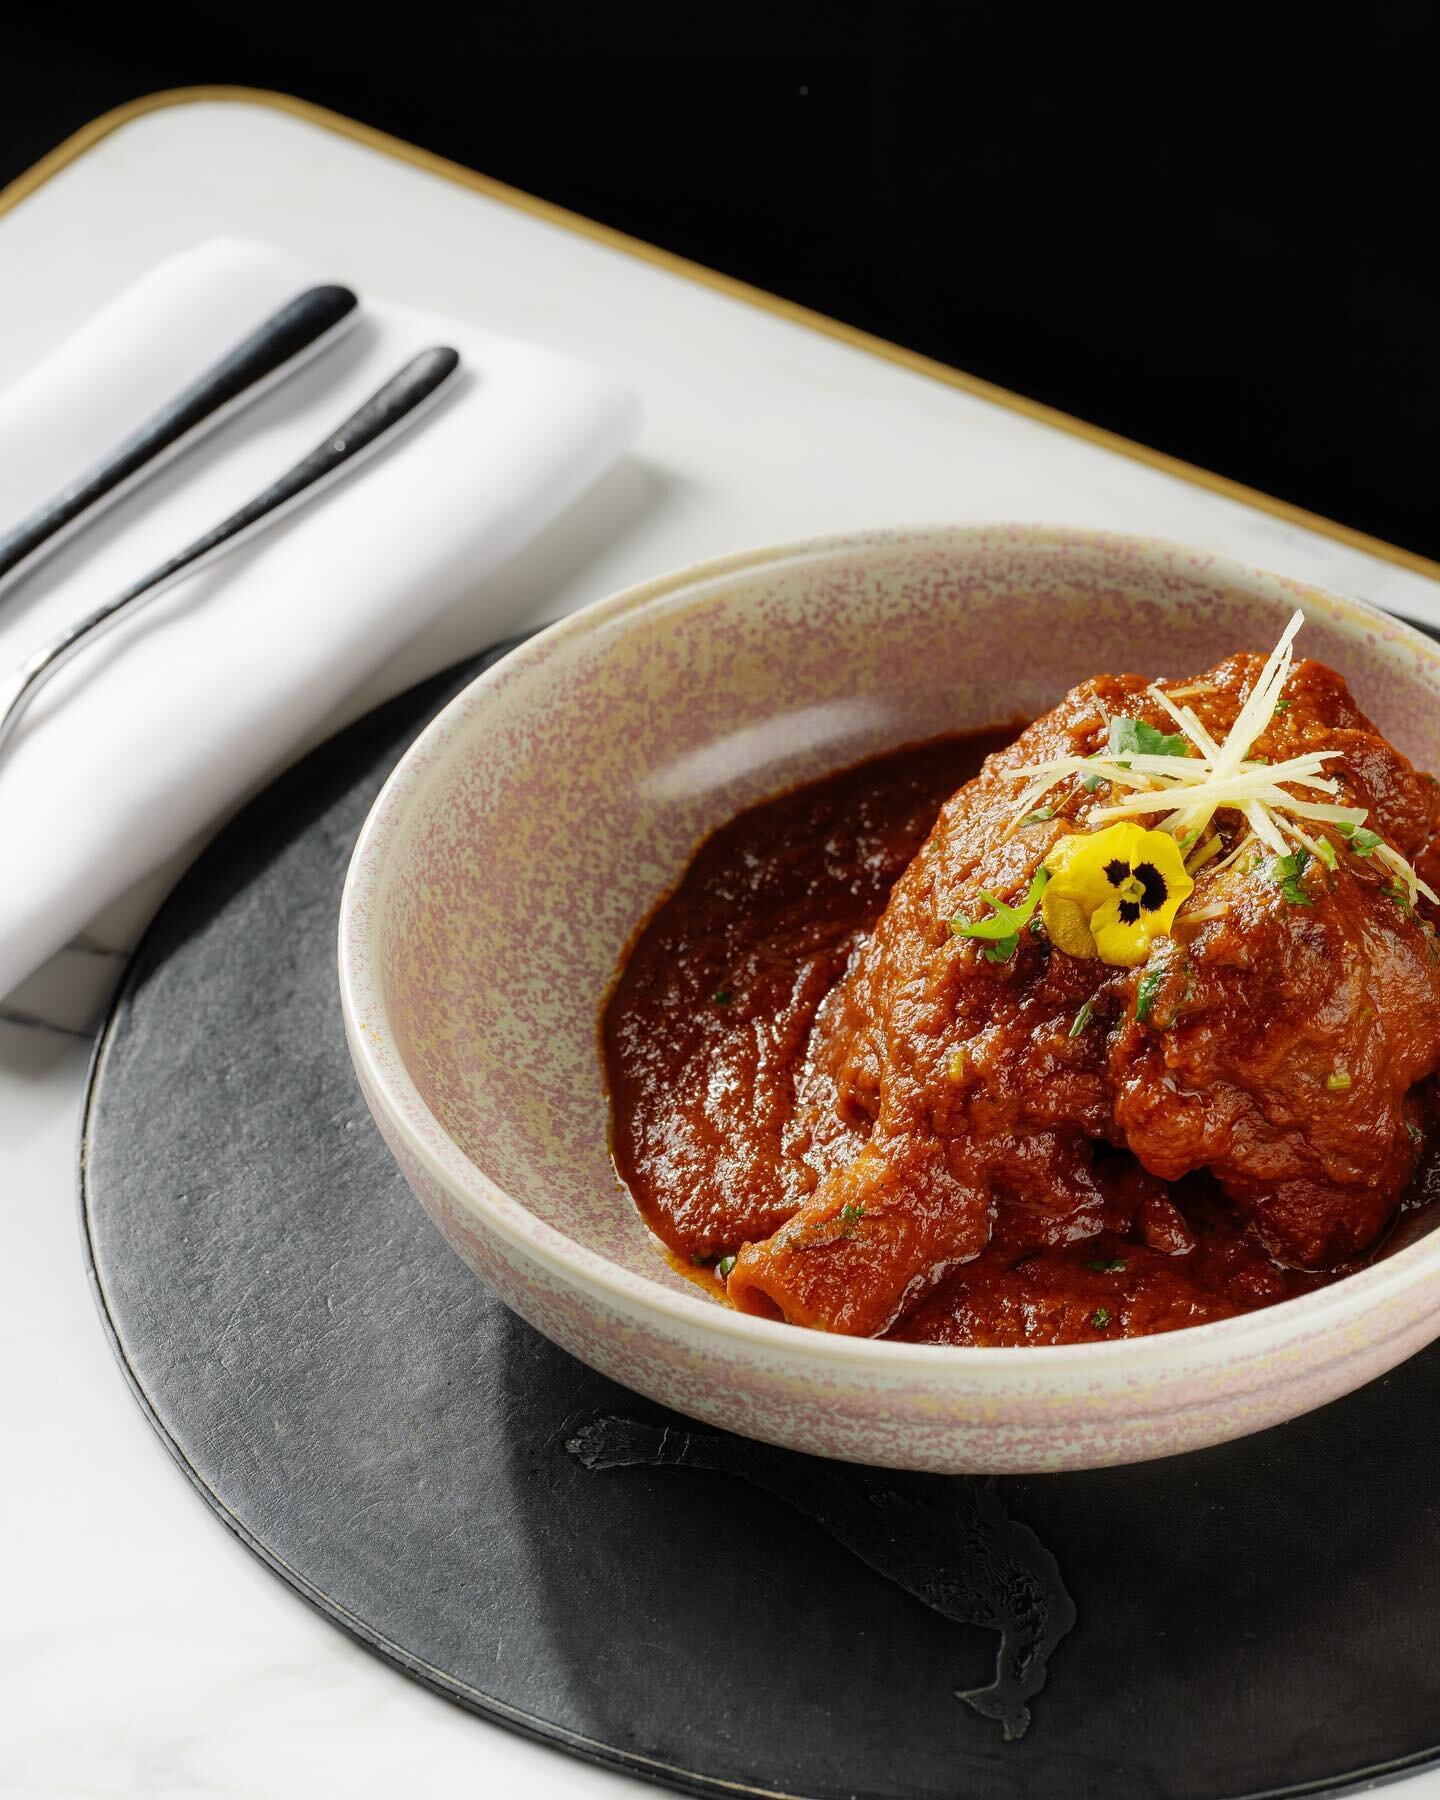 Come and warm yourself up with our delicious Lamb Shank rogan josh @harrodsfood @chefvineet